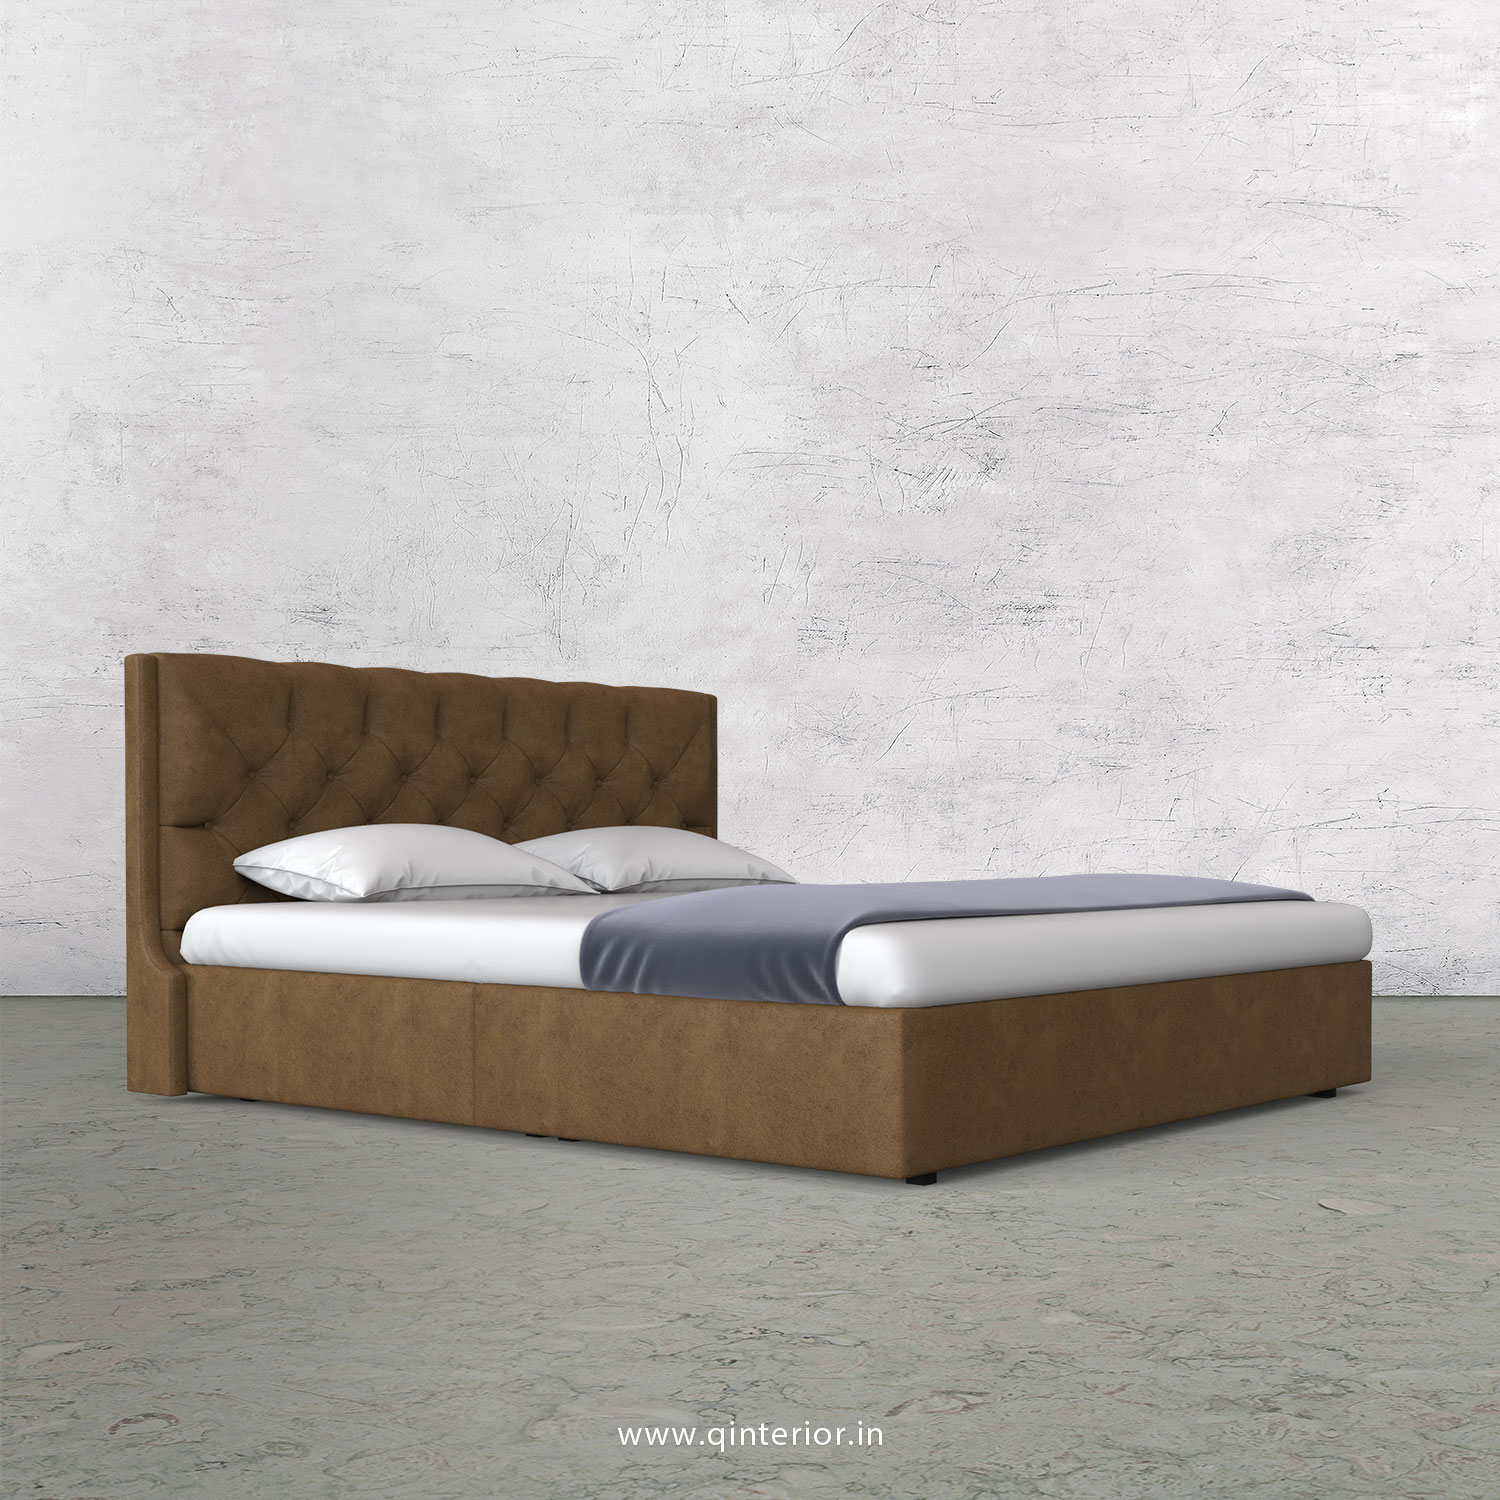 Scorpius Queen Bed in Fab Leather Fabric - QBD009 FL02